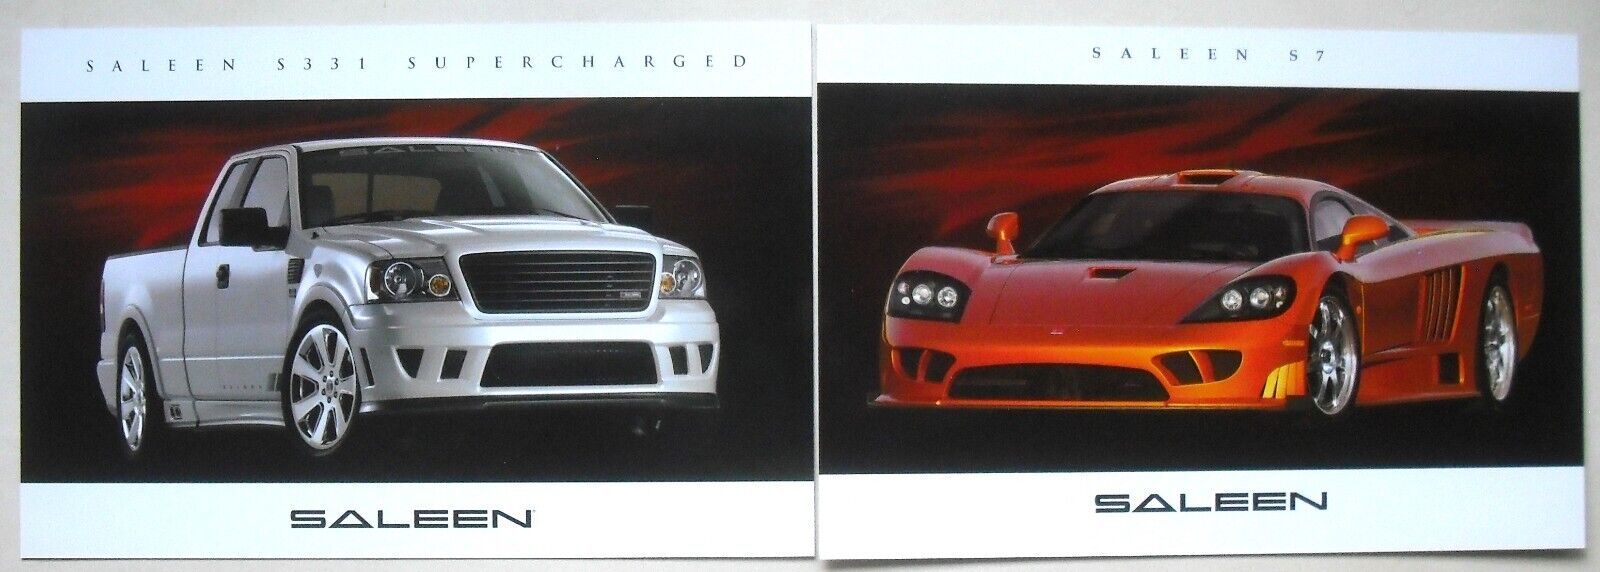 2006 2007 Ford Saleen S7 & S331 Supercharged Truck Brochures Sheet 6 x 9 Inch